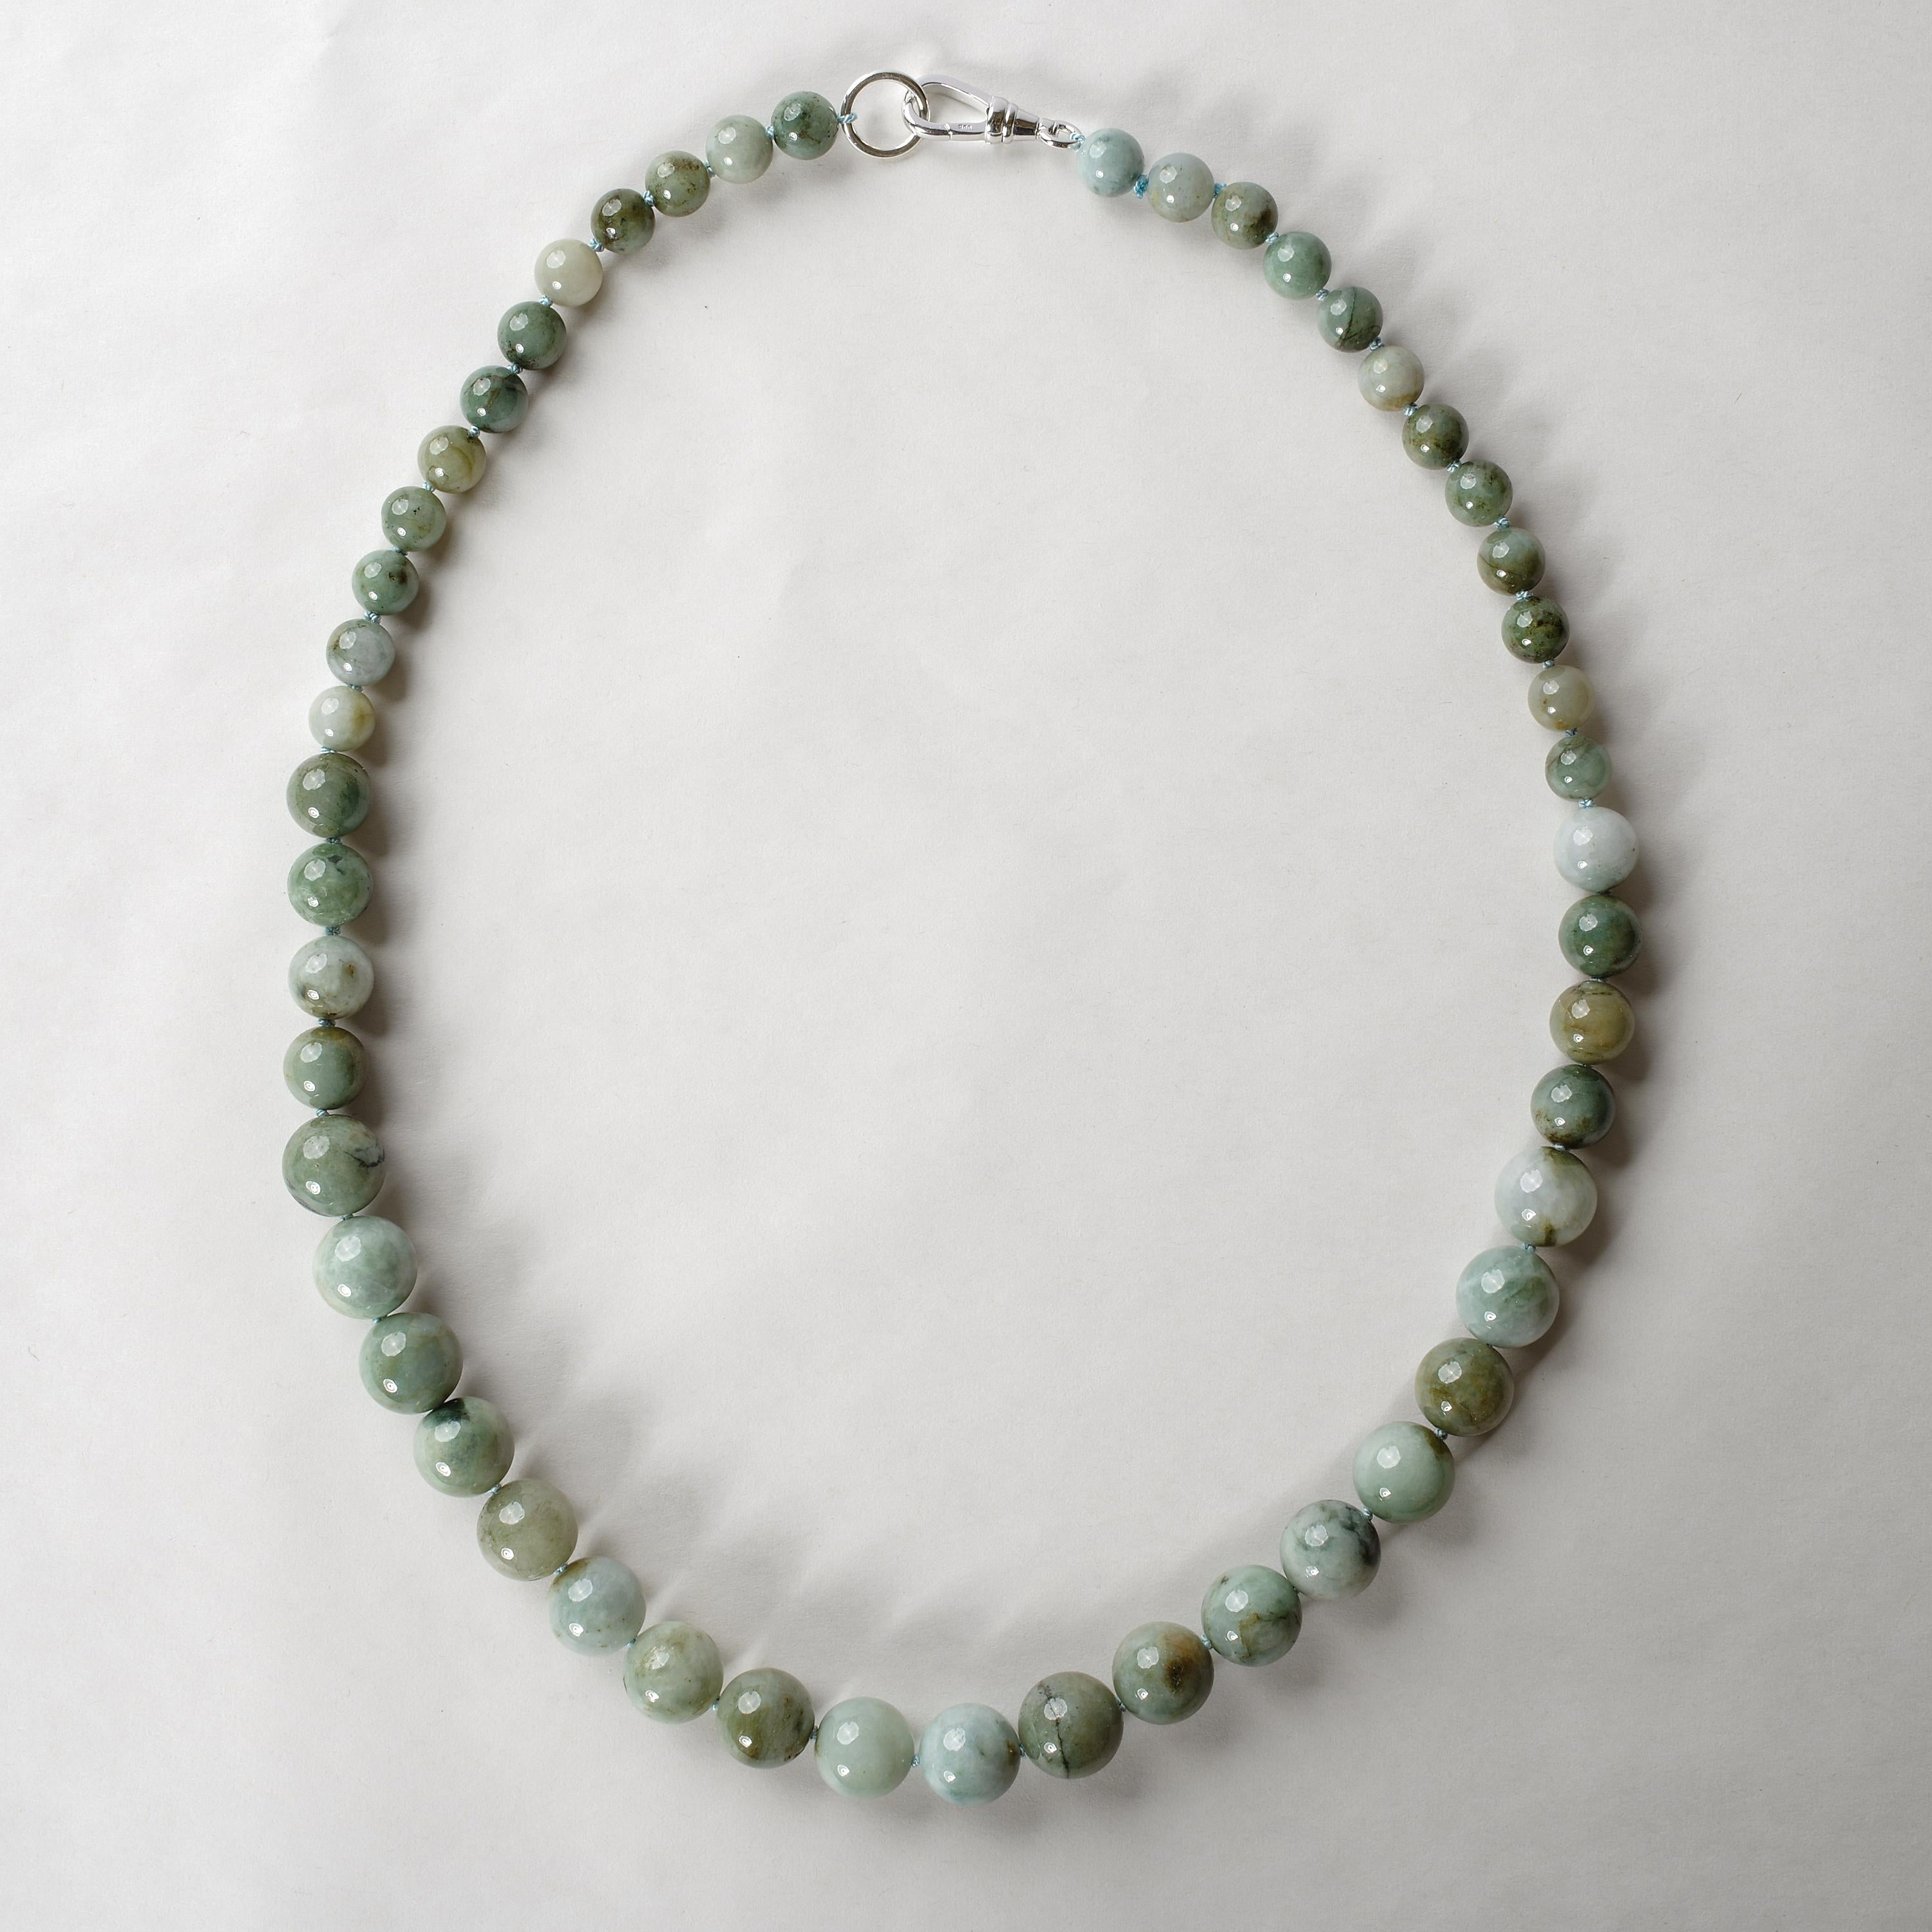 Imperial jade beads the color of emeralds from the South American jungles and as translucent as glass, these are not. What they are is a collection of 50 natural and untreated jadeite jade beads from Burma that feature natural coloration lines,